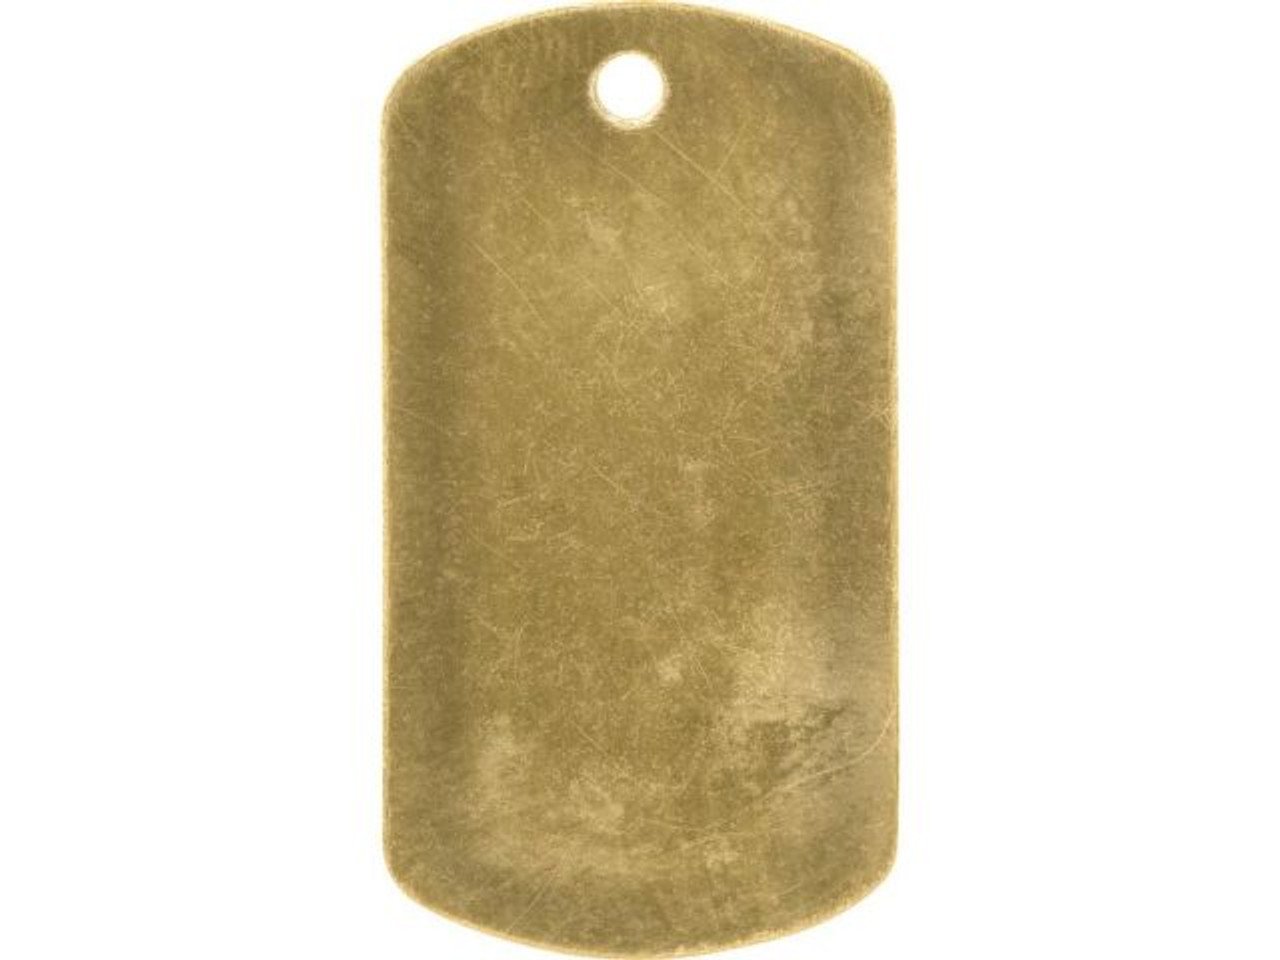 RMP Stamping Blanks, 1 x 2 Inch Dog Tag Blank With 1 Hole